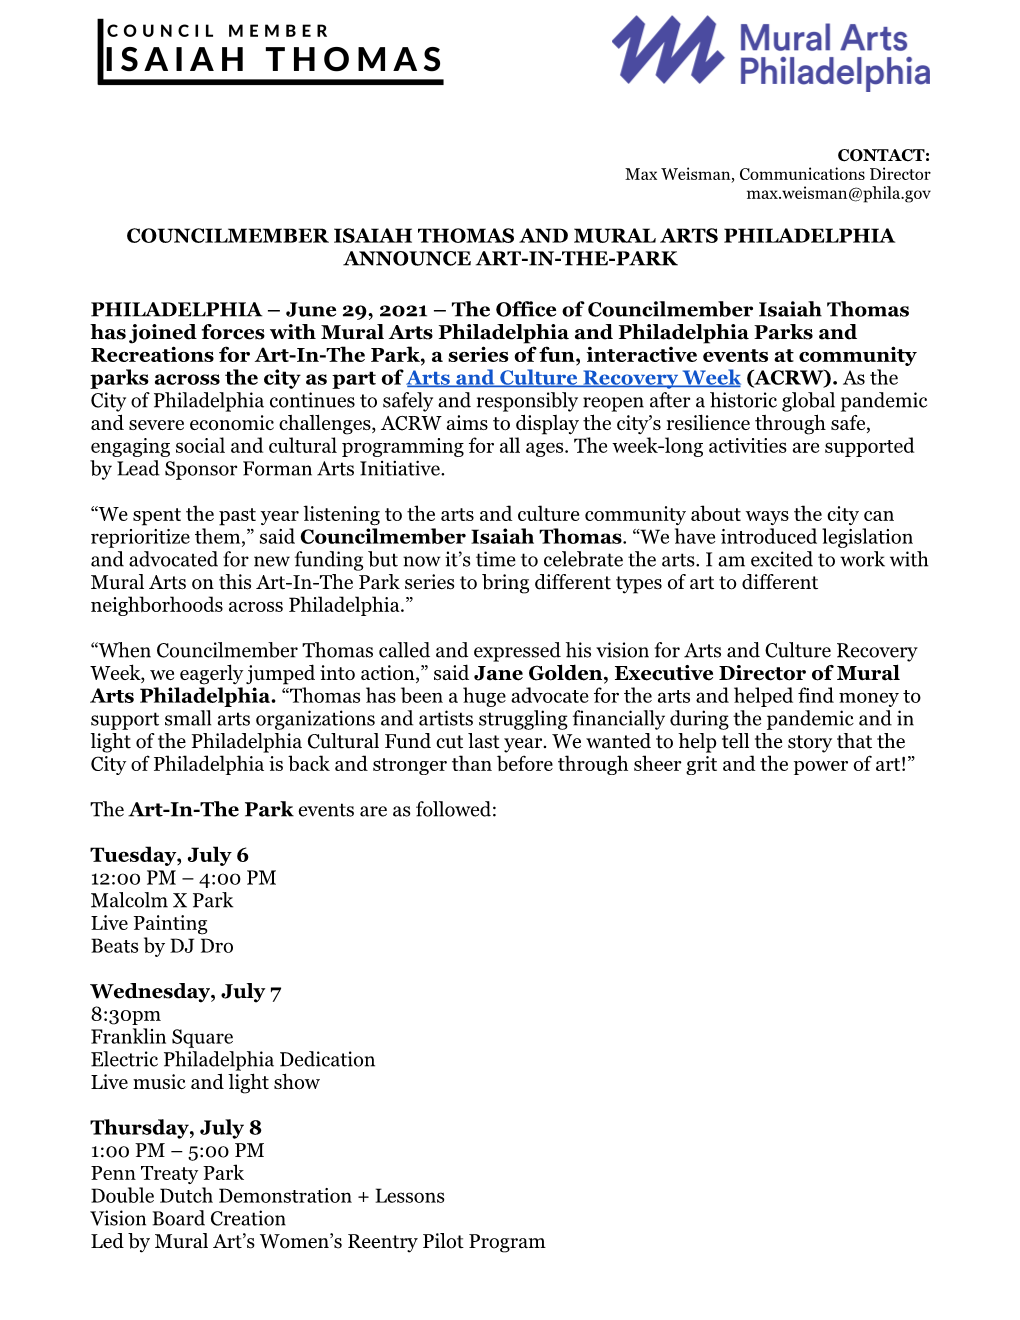 Art-In-The-Park Press Release